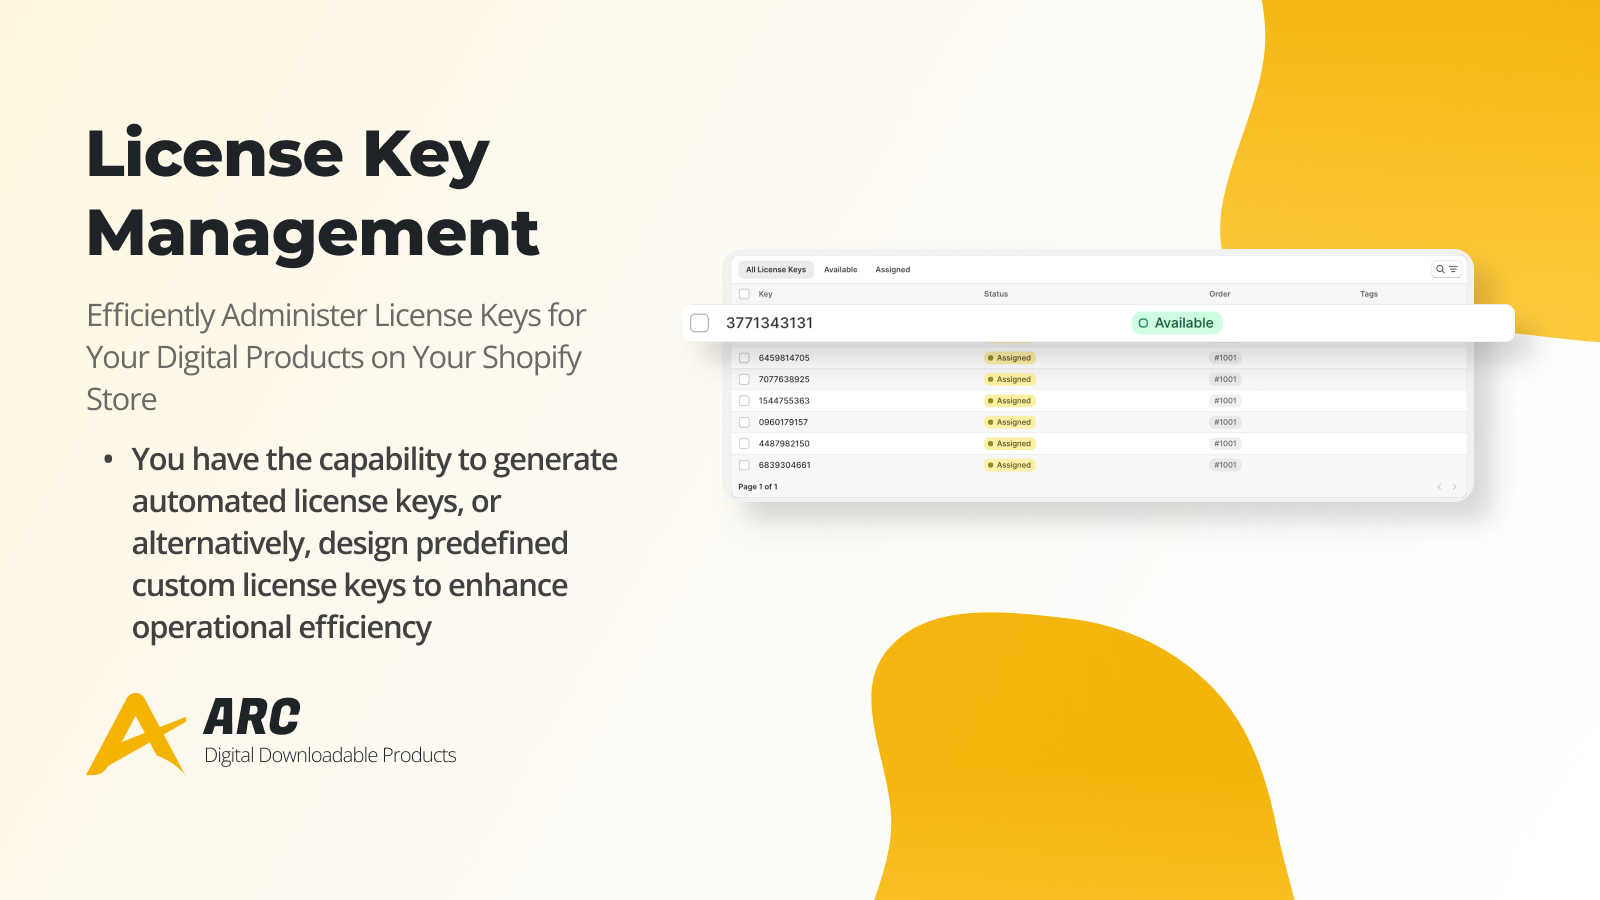 Arc Digital Downloadable Products: Manage Your License Keys